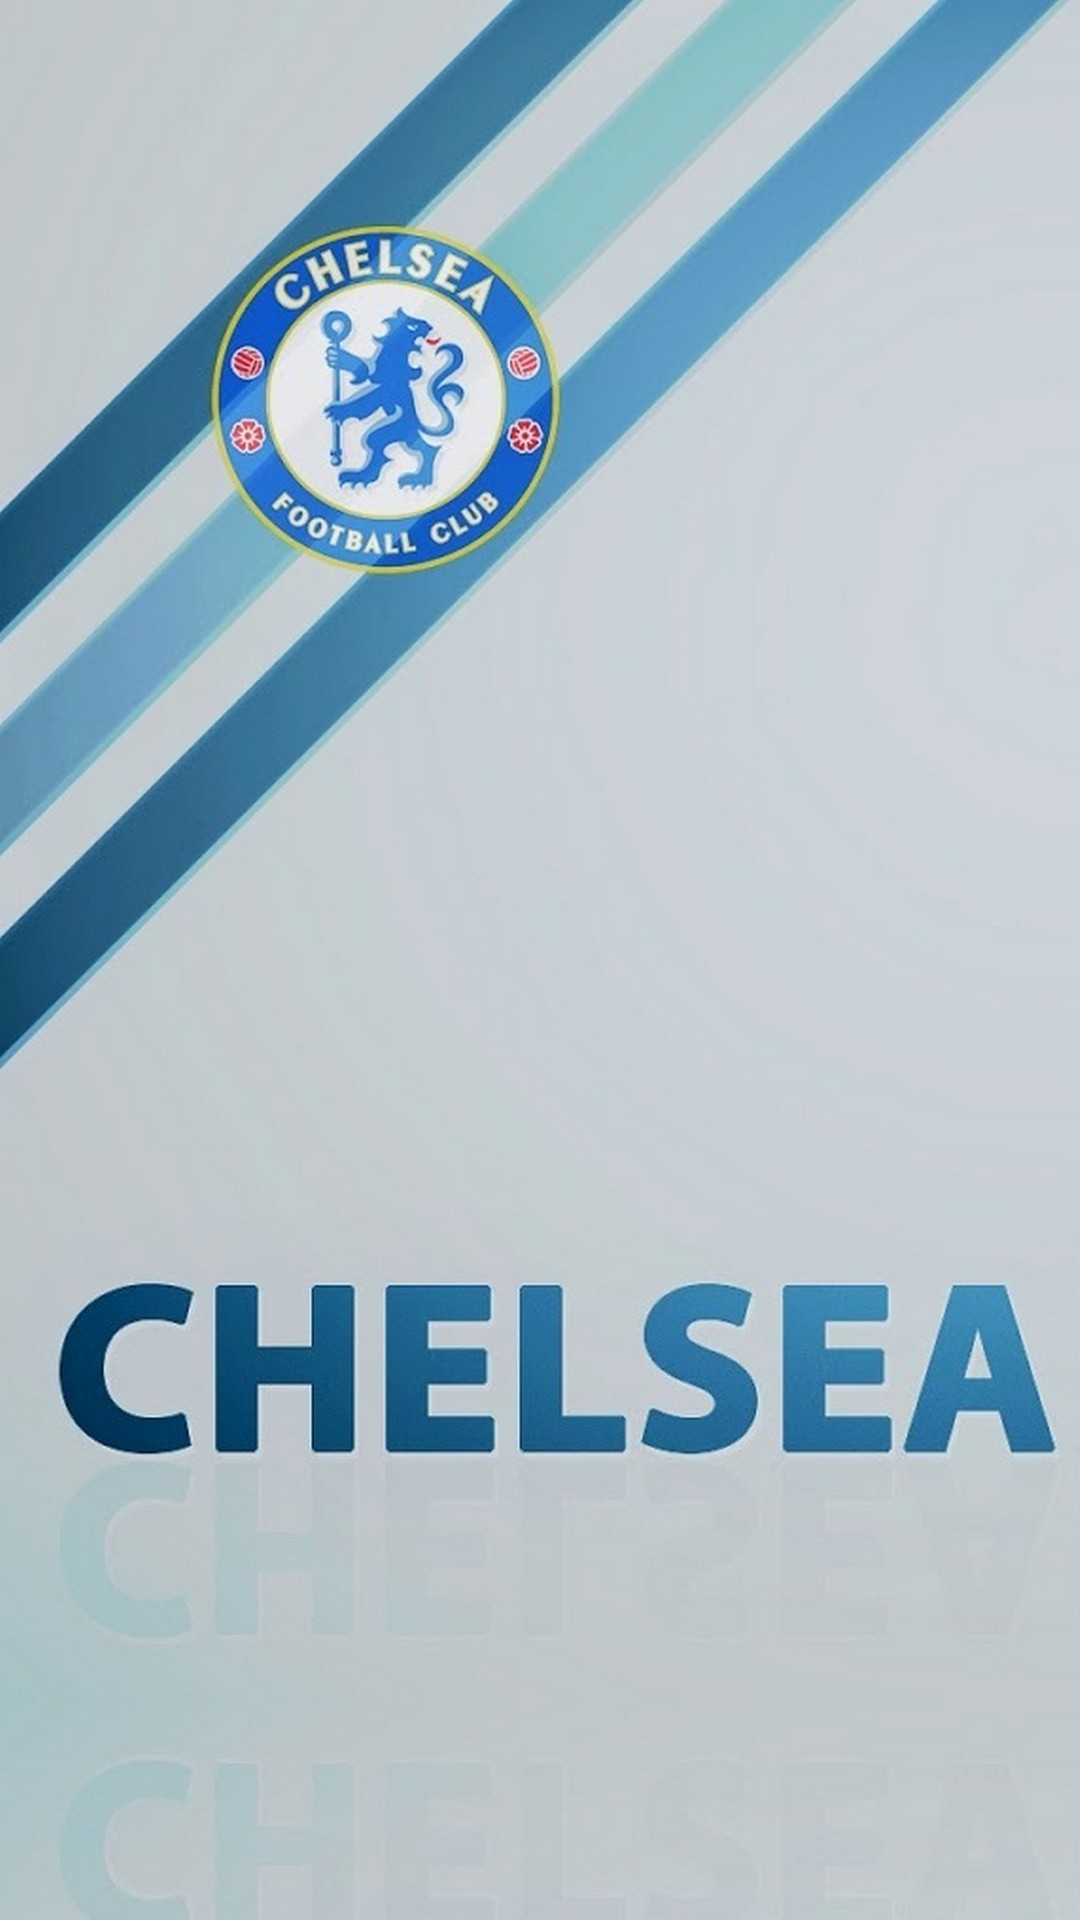 Chelsea Champions League Wallpaper iPhone HD With Resolution 1080X1920 pixel. You can make this wallpaper for your Mac or Windows Desktop Background, iPhone, Android or Tablet and another Smartphone device for free